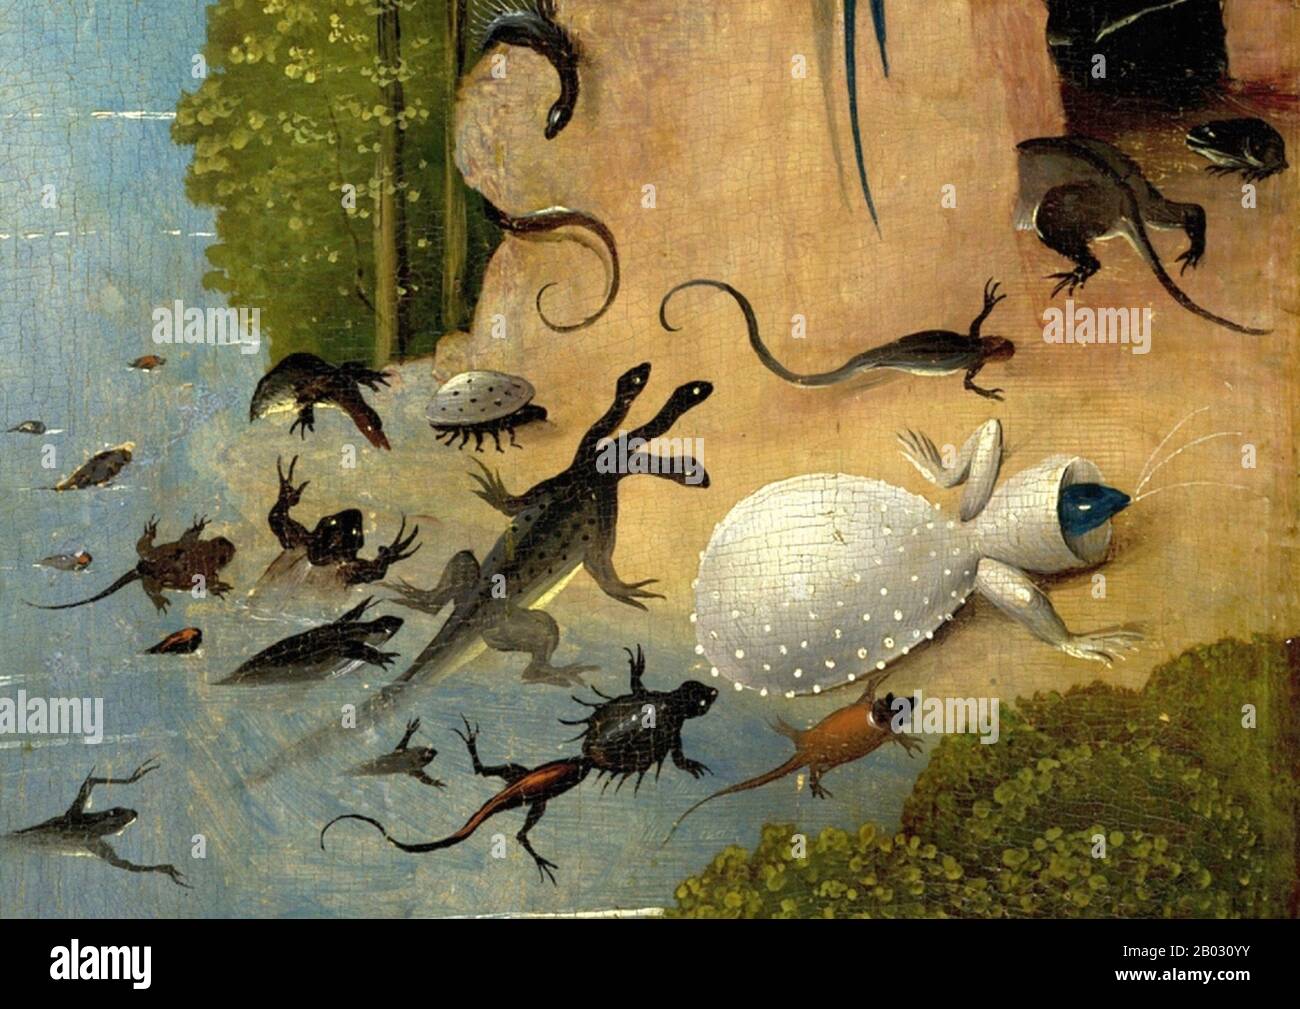 Creatures from the world of Hieronymus Bosch Stock Photo - Alamy